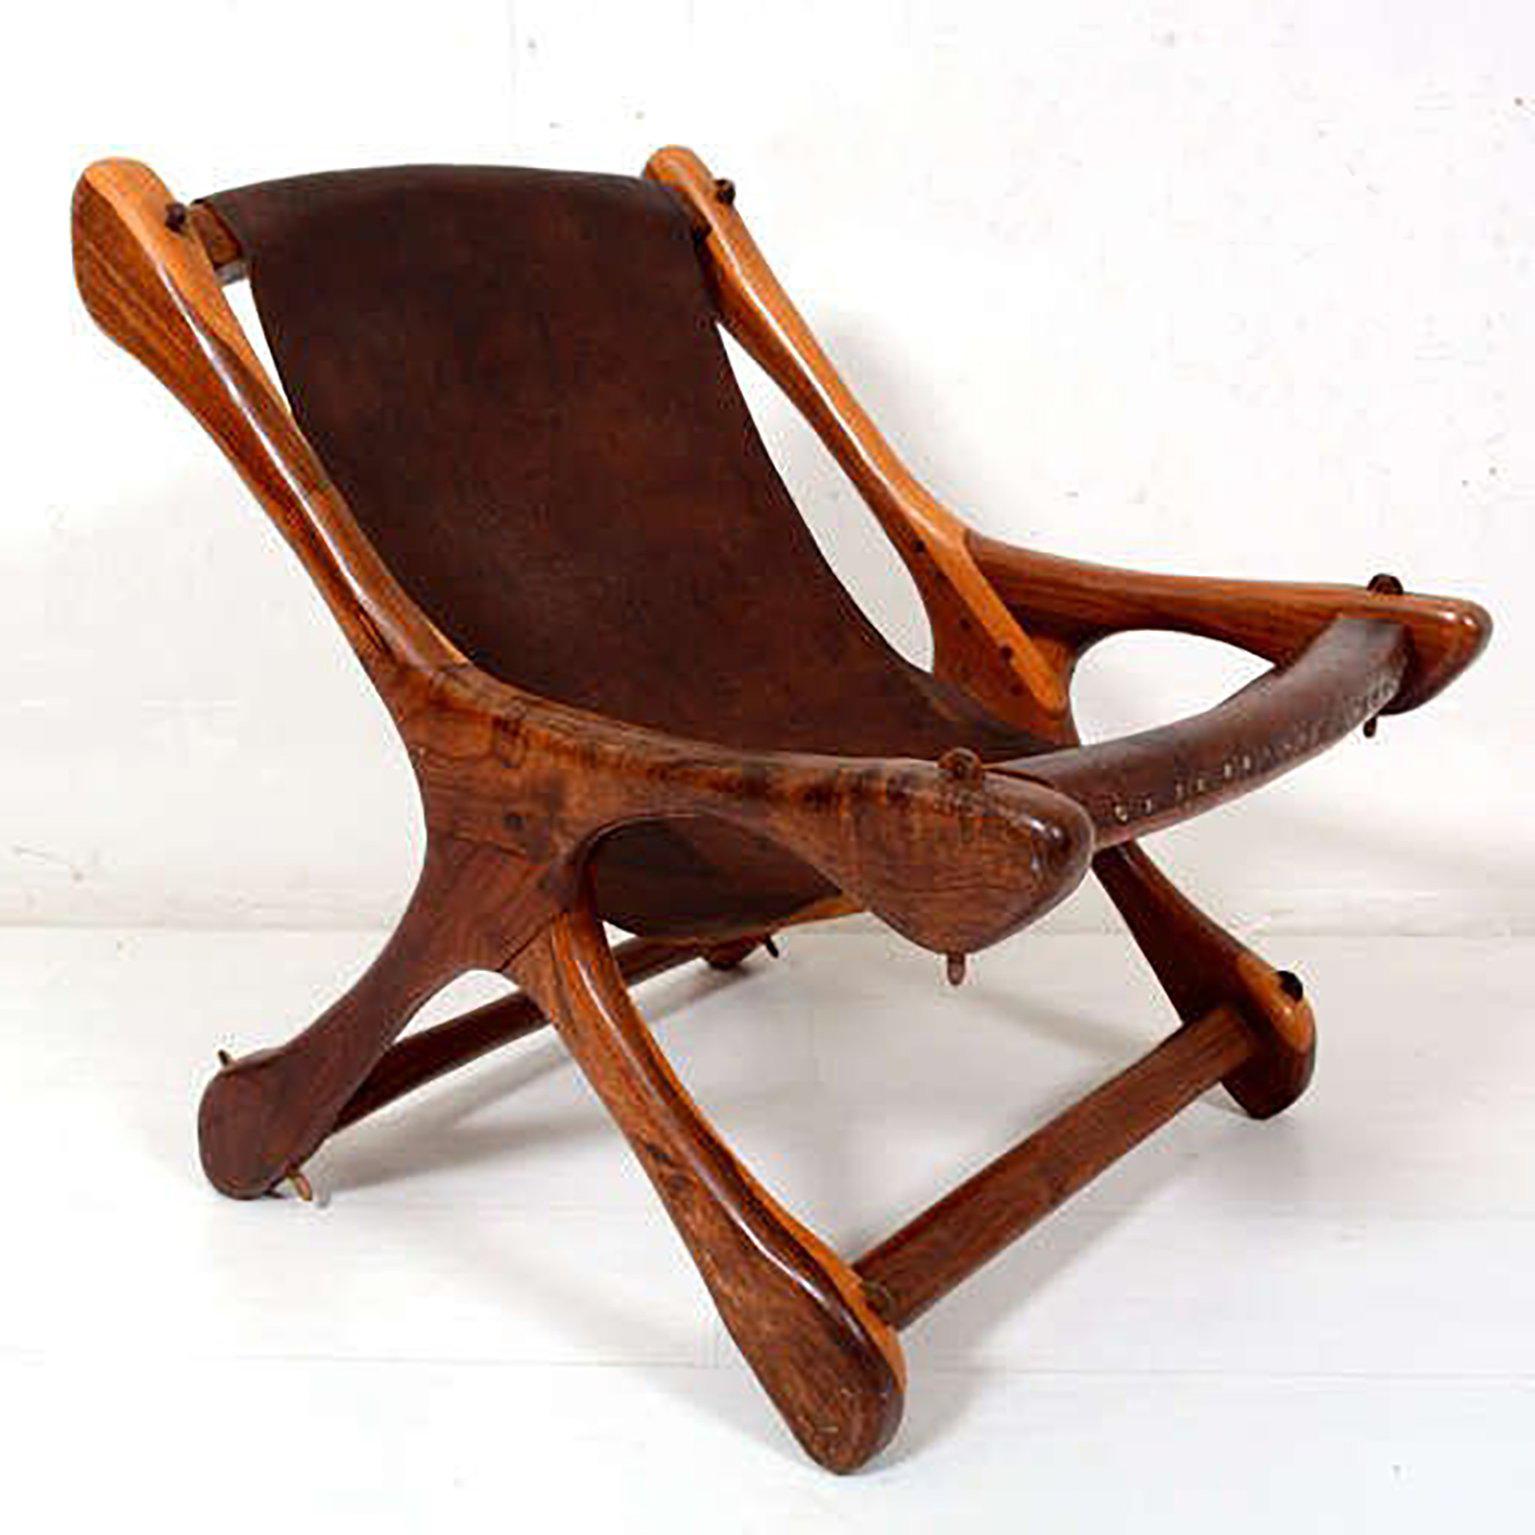 For your consideration a sling chair with sculptural wood frame and old leather sling. Leather attached by nails to the wood frame. 

Stamped: Senal, STA MARIA, MORELIA MEX.

